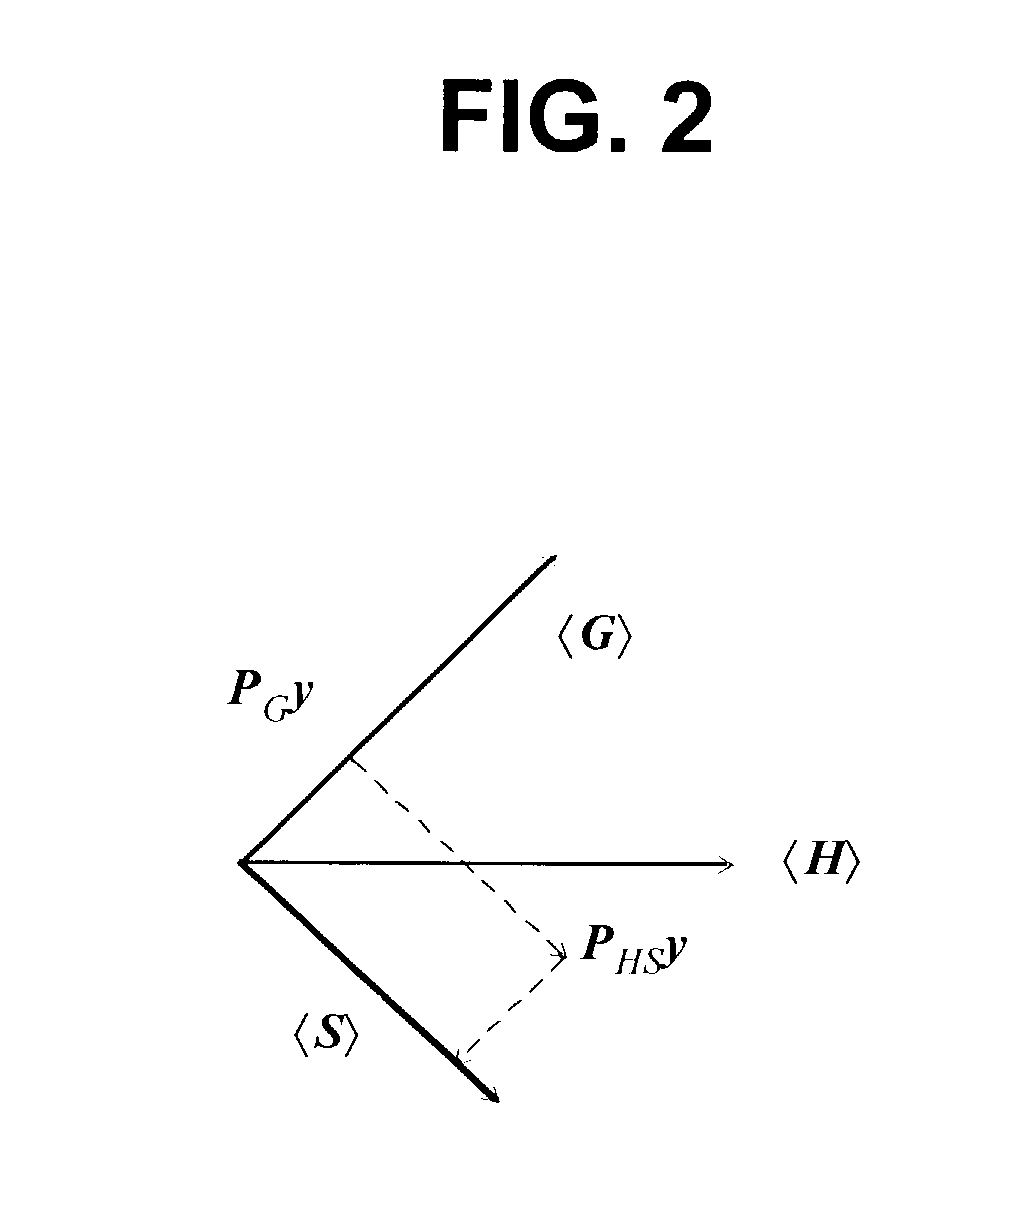 Construction of an interference matrix for a coded signal processing engine